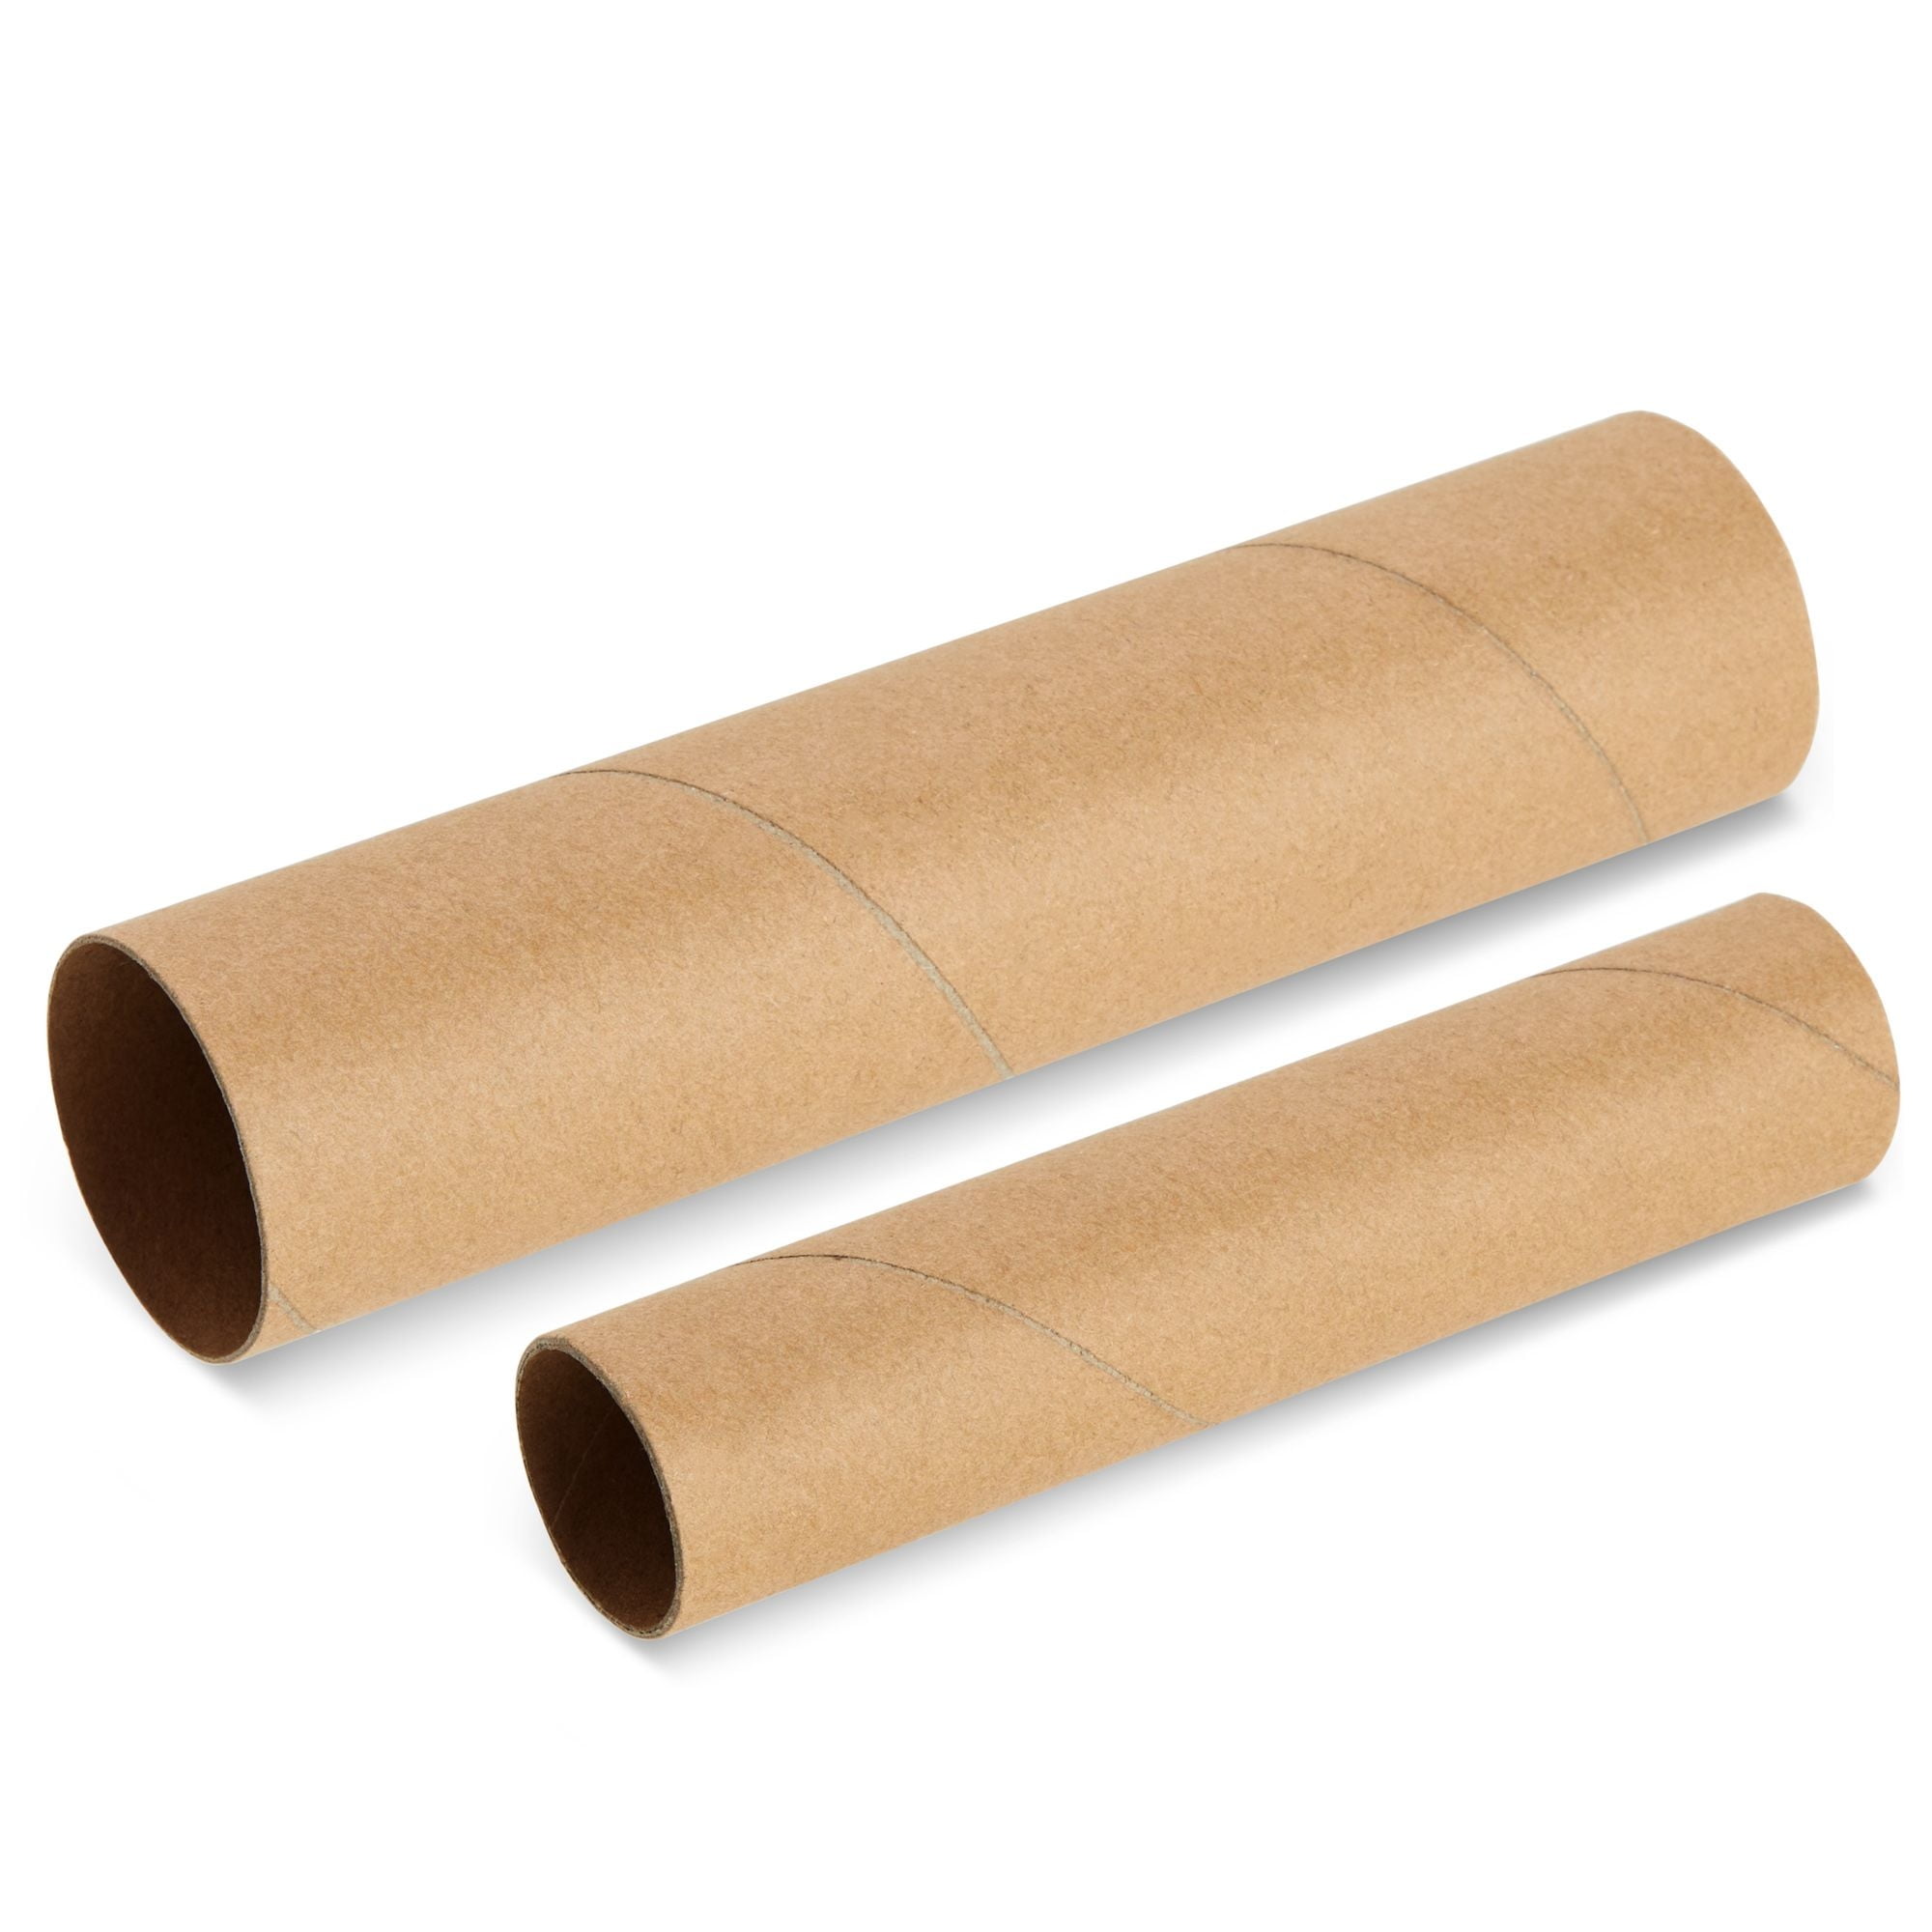 50 Empty Brown Cardboard Rolls for Crafts, DIY Projects, 2 Sizes, 6 and 7.5  In